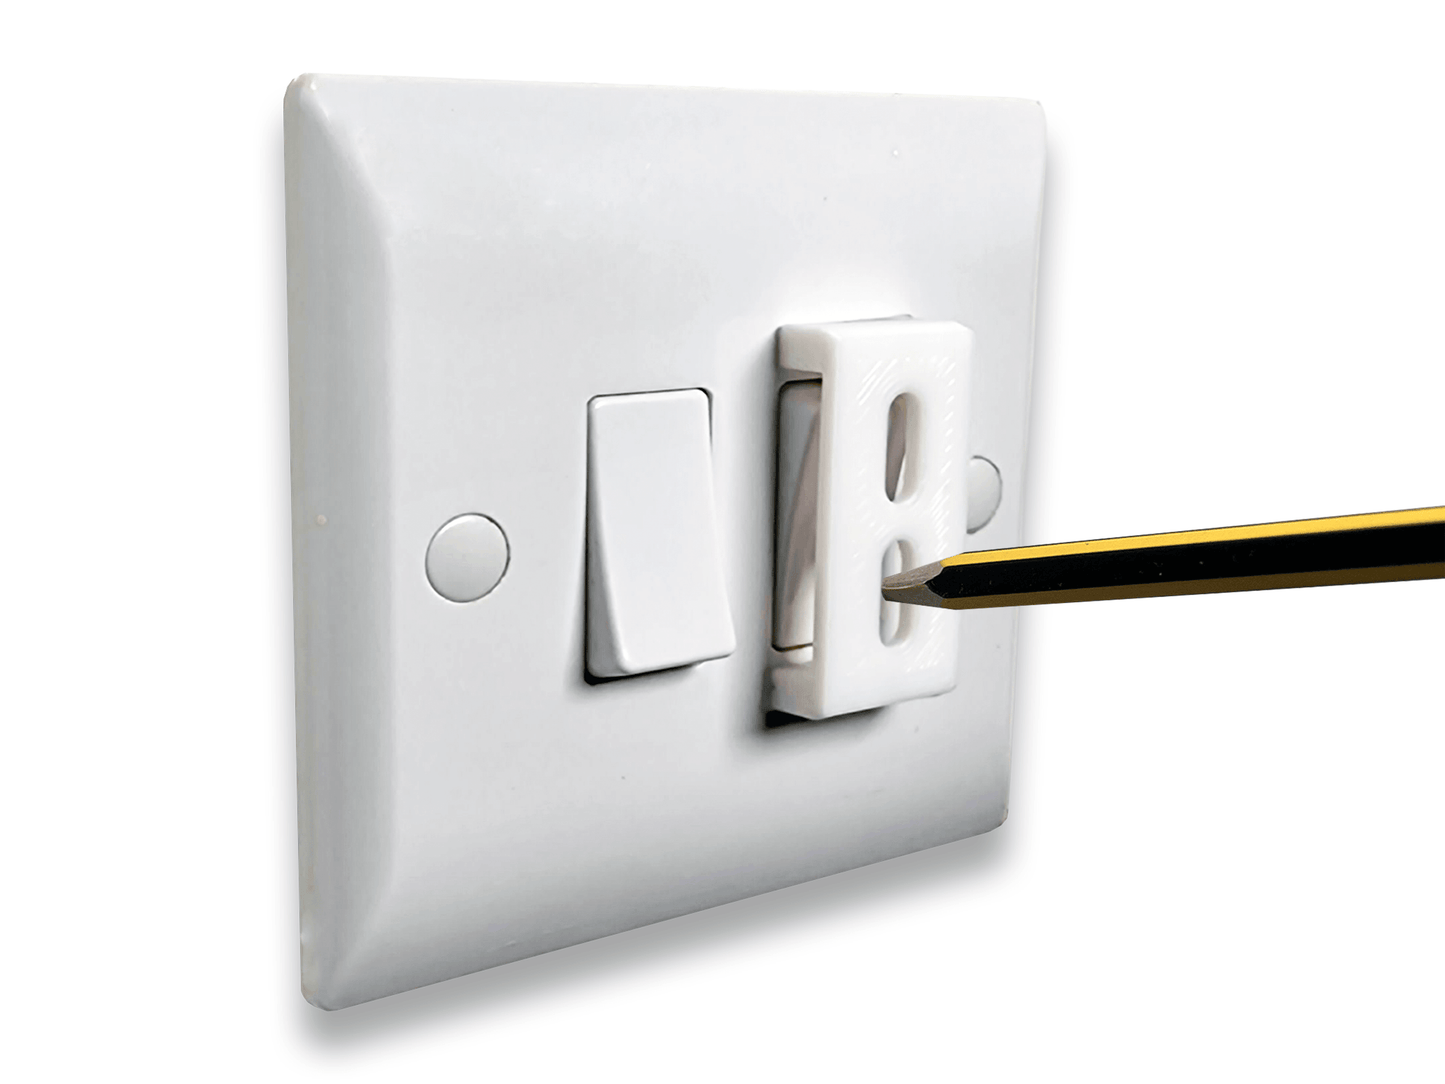 Light Switch Cover Guard Caps Prevents Kids or Accidental On Off Switching Whilst Allowing Easy Access for Intentional Switching Pack of 4 - Decoralin